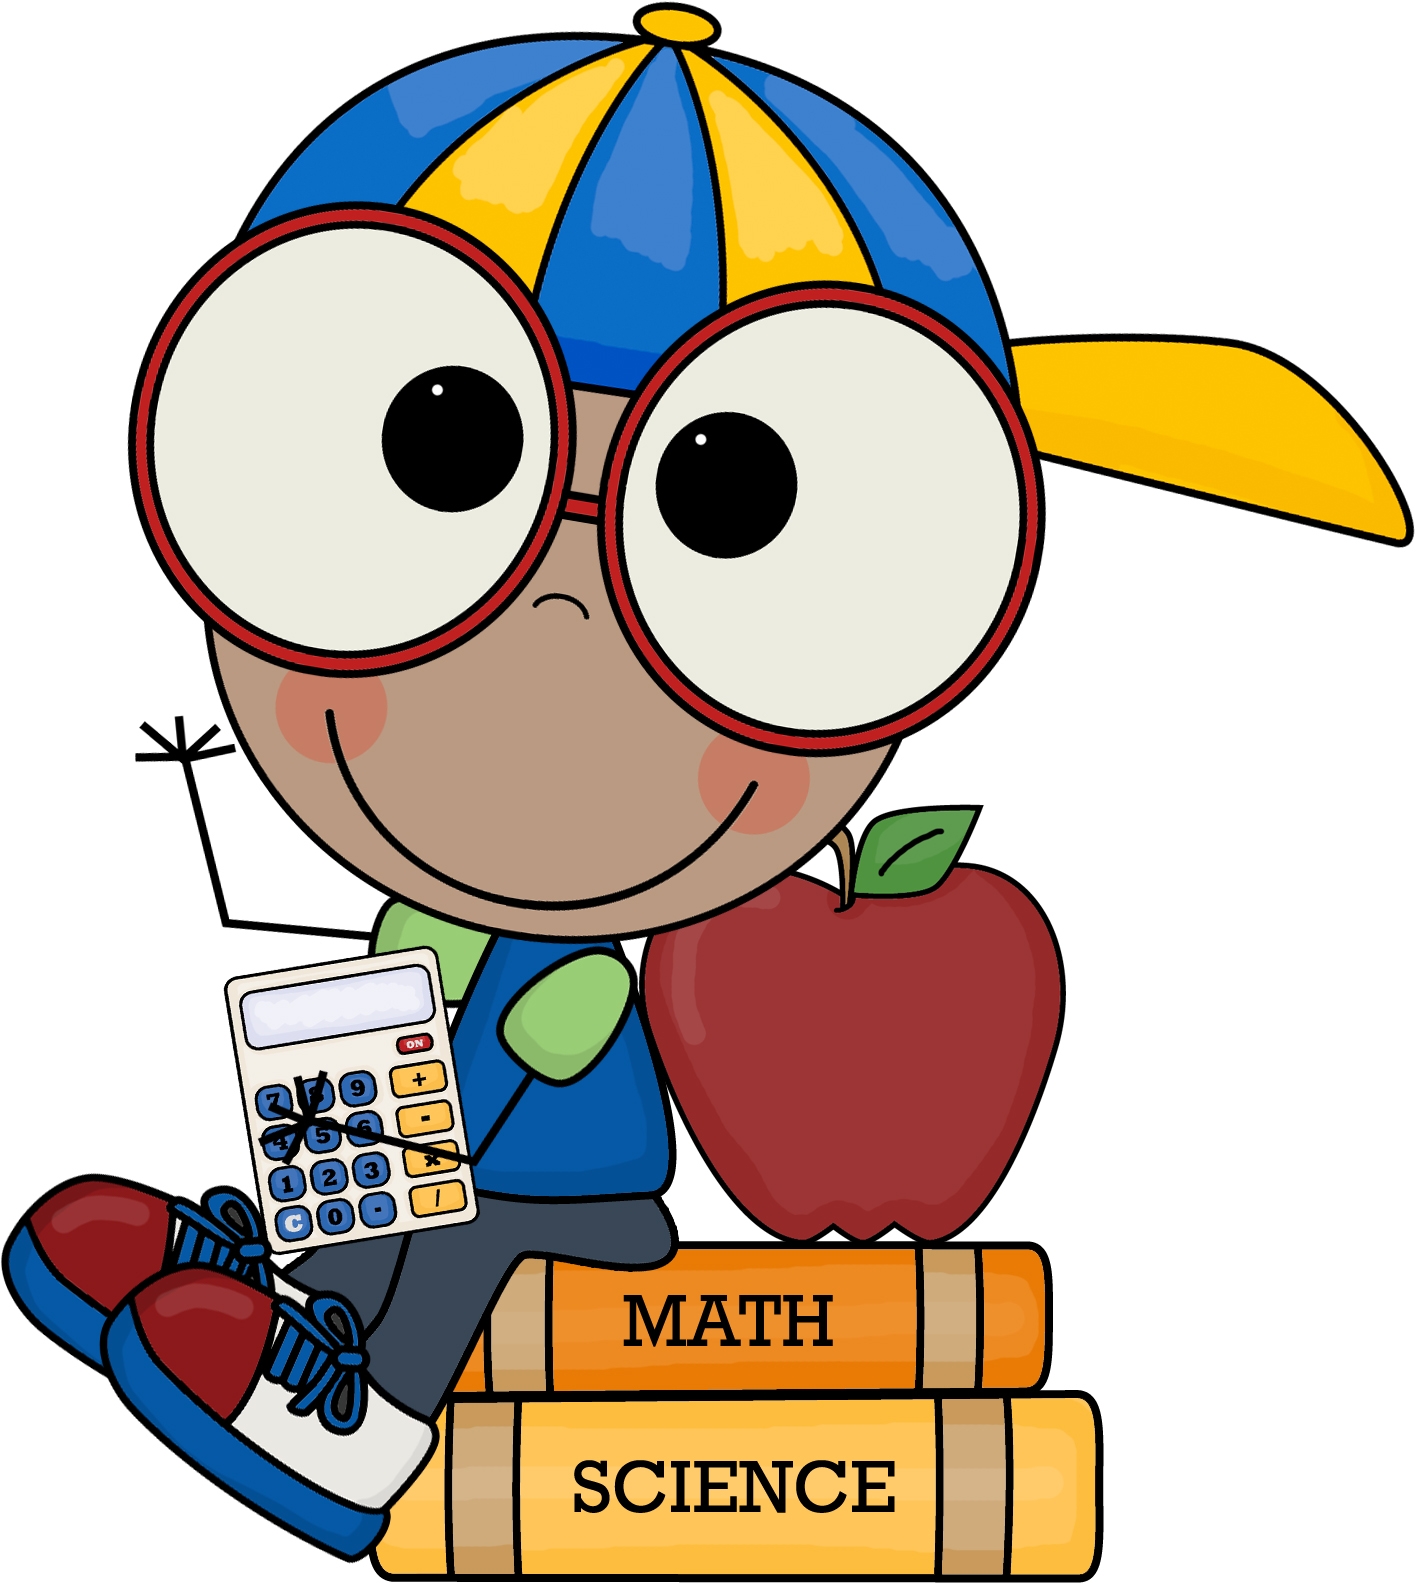 going back to school clipart - photo #31